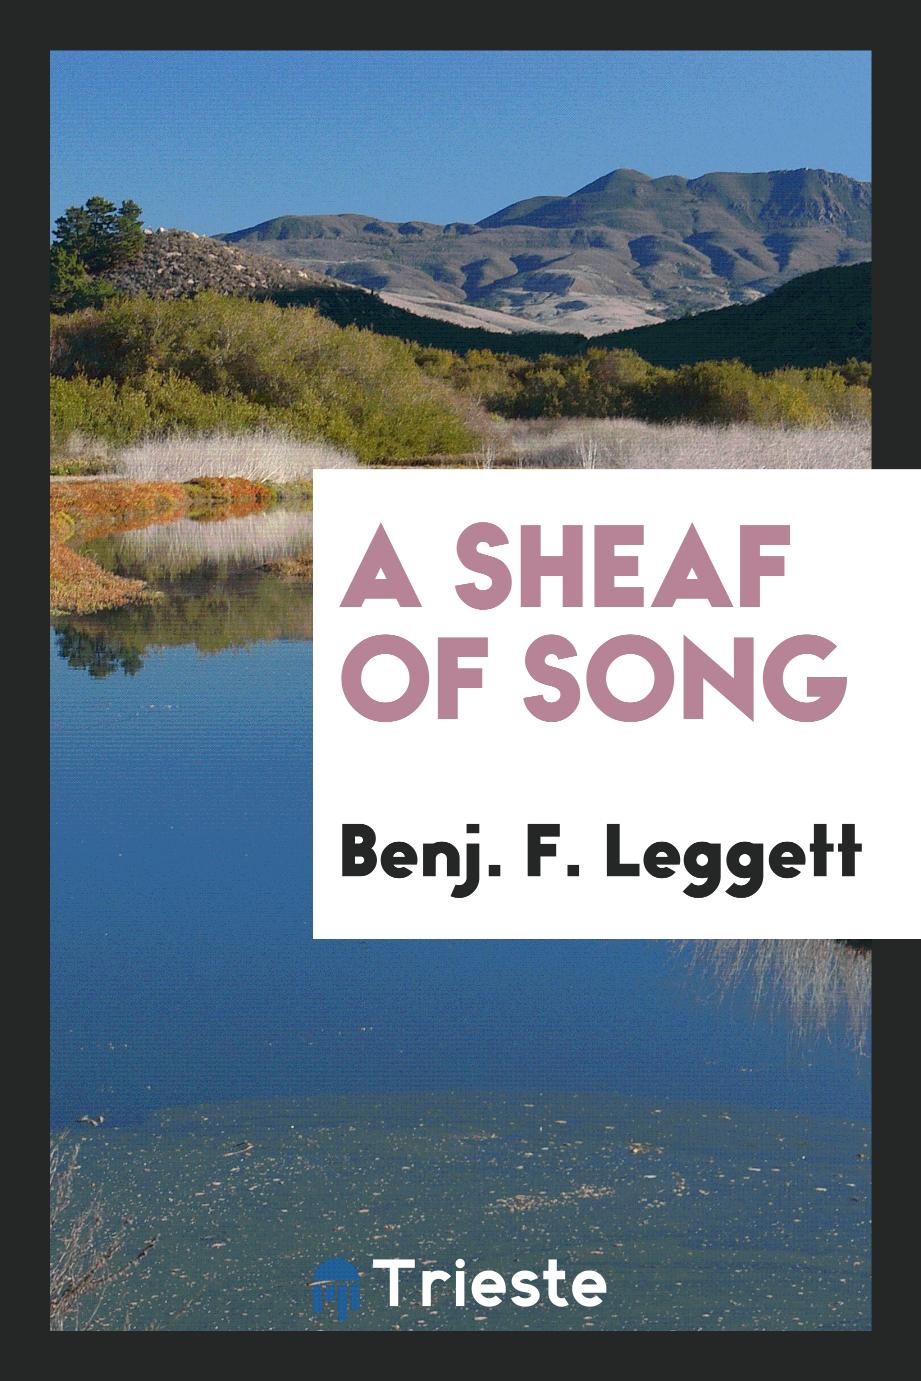 A Sheaf of Song